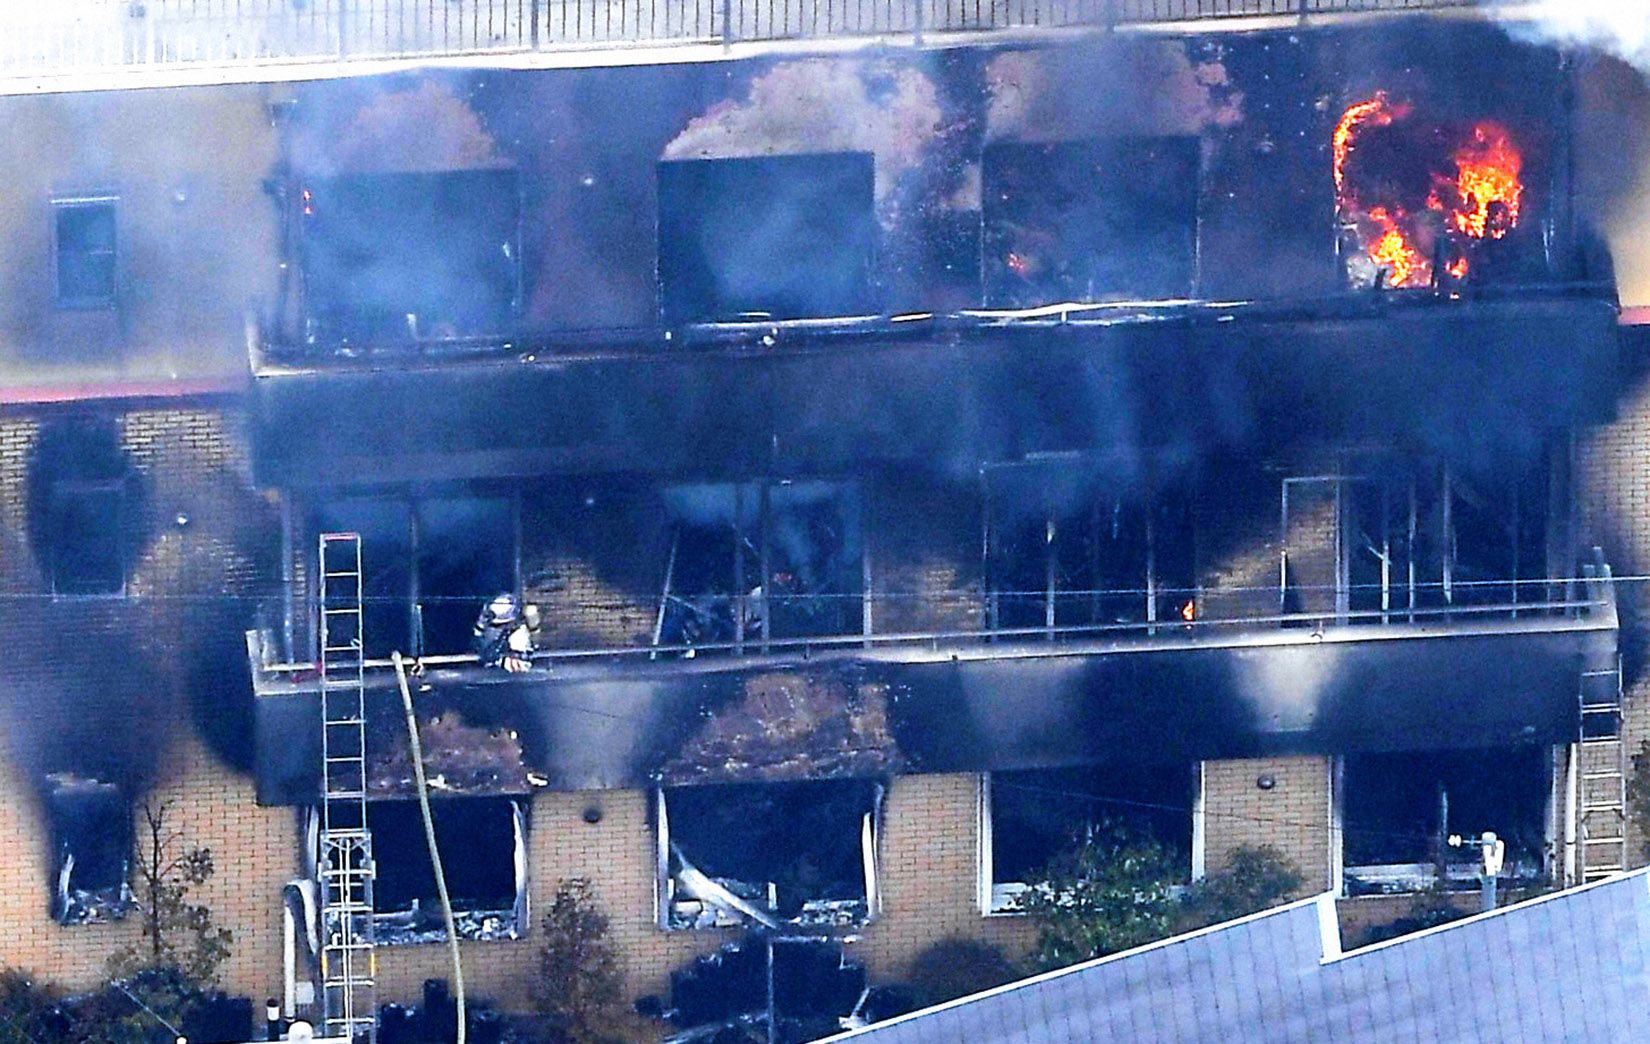 Suspected arson attack on Kyoto Animation studio leaves 33 dead in Japan's  worst mass killing in decades | CNN